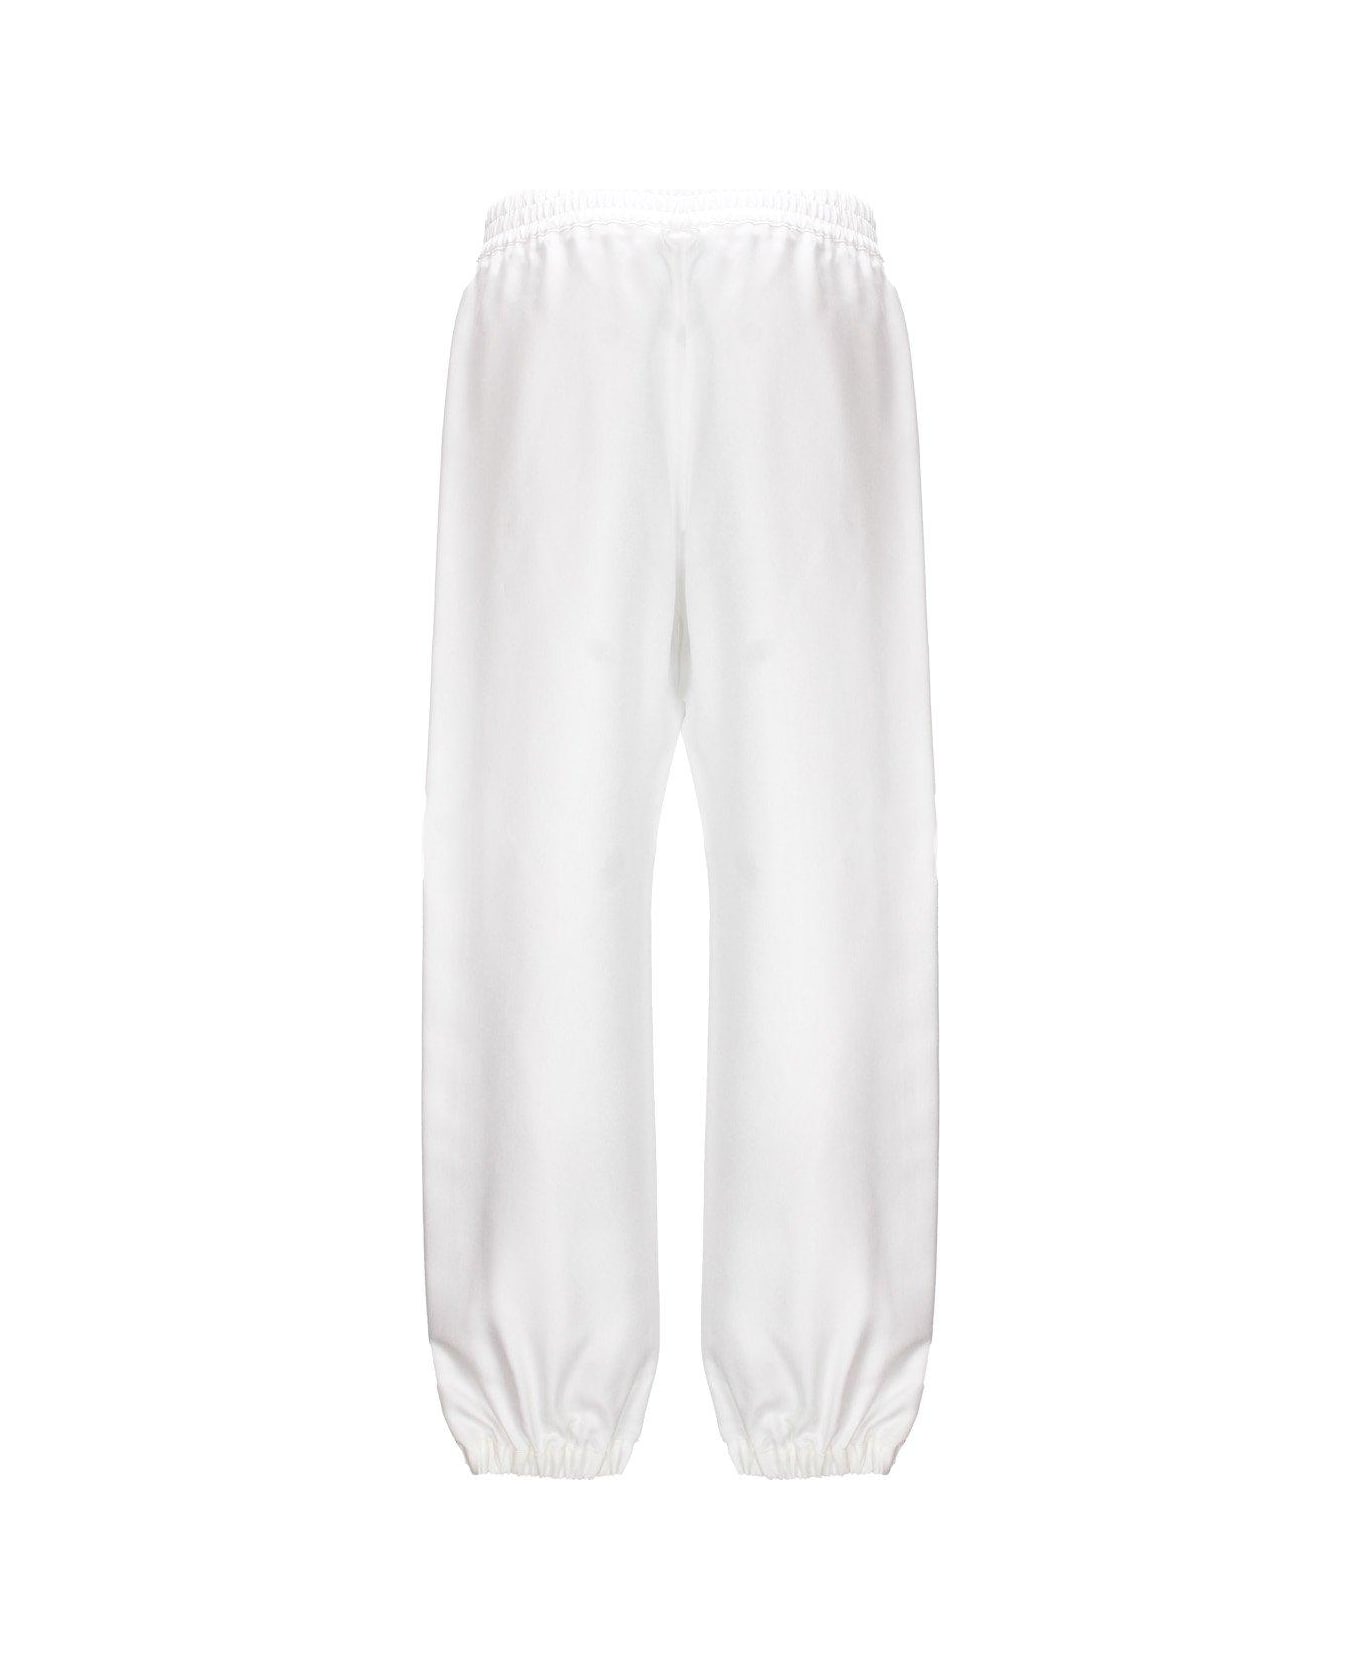 Moncler Side Striped Trousers - White スウェットパンツ